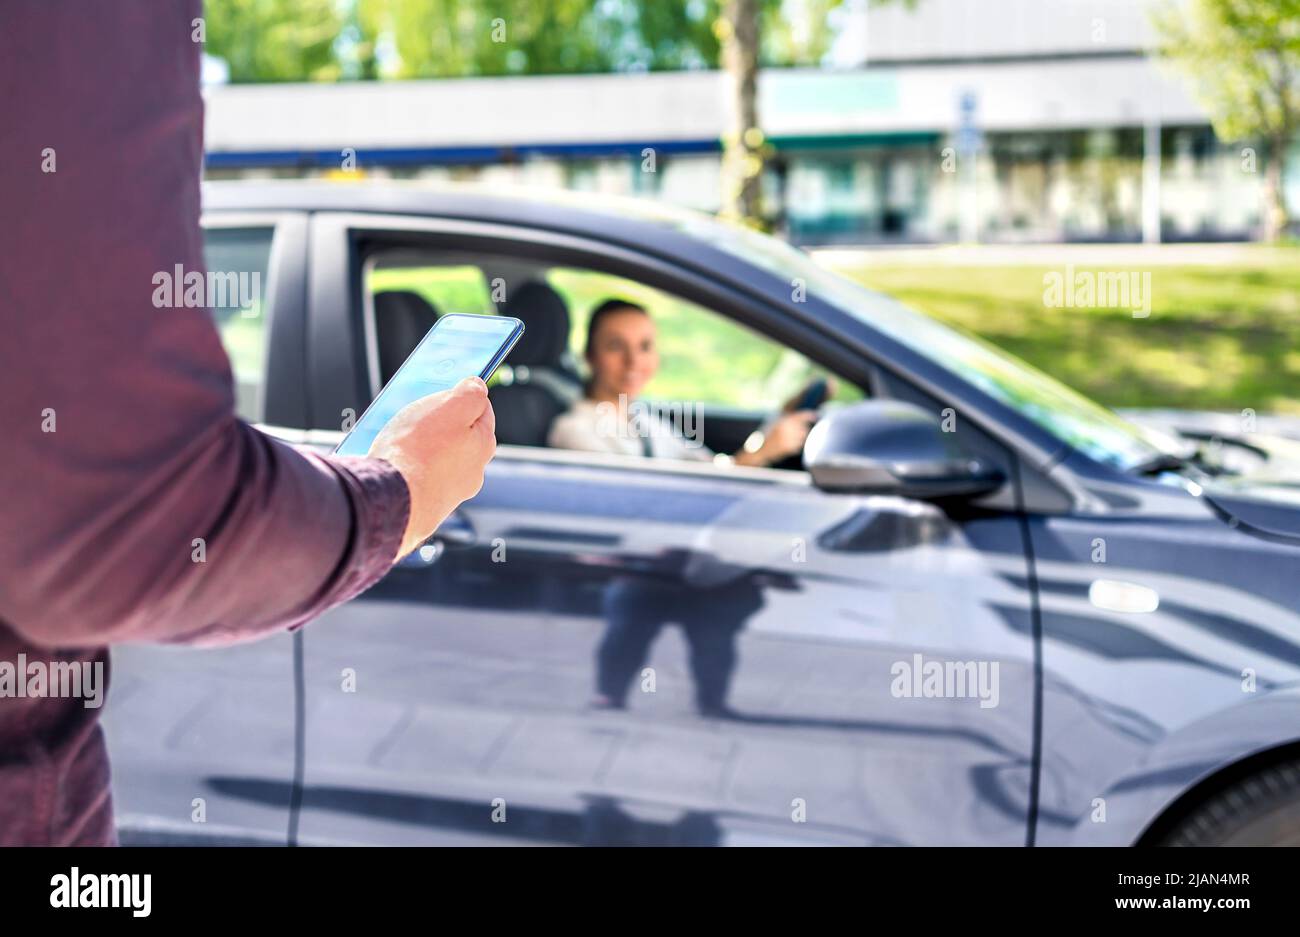 Taxi phone app for cab or car ride share service. Customer waiting driver to pick up on city street. Man holding smartphone. Mobile and online booking. Stock Photo